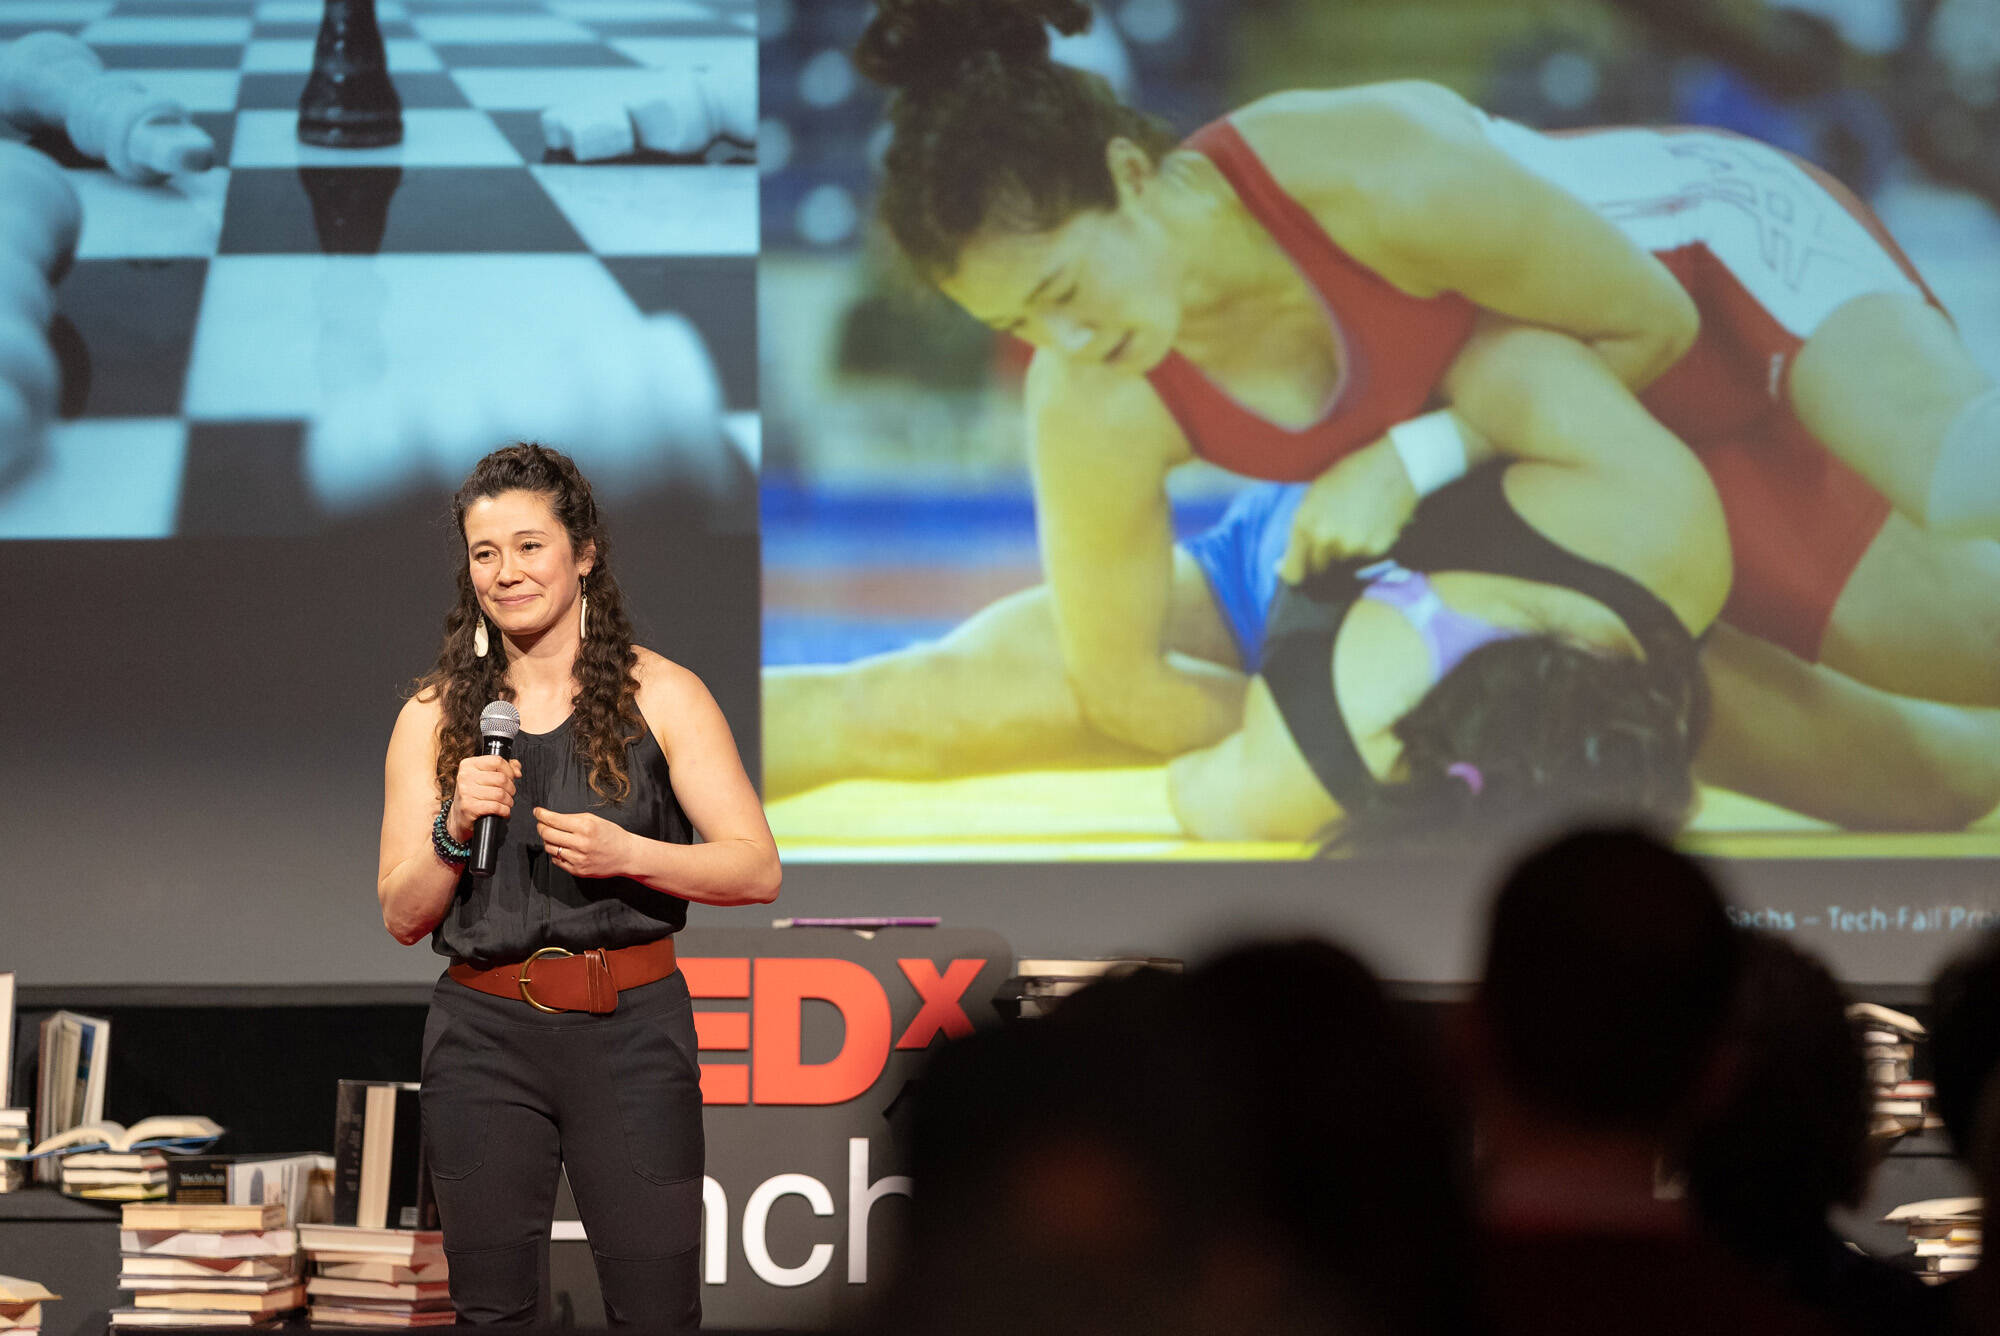 Tela O’Donnell Bacher speaks at a TedX talk in Anchorage on Saturday, March 19, 2022. (Photograph by Charly Savely. Used under a Creative Commons license at https://creativecommons.org/licenses/by-nc-nd/2.0)